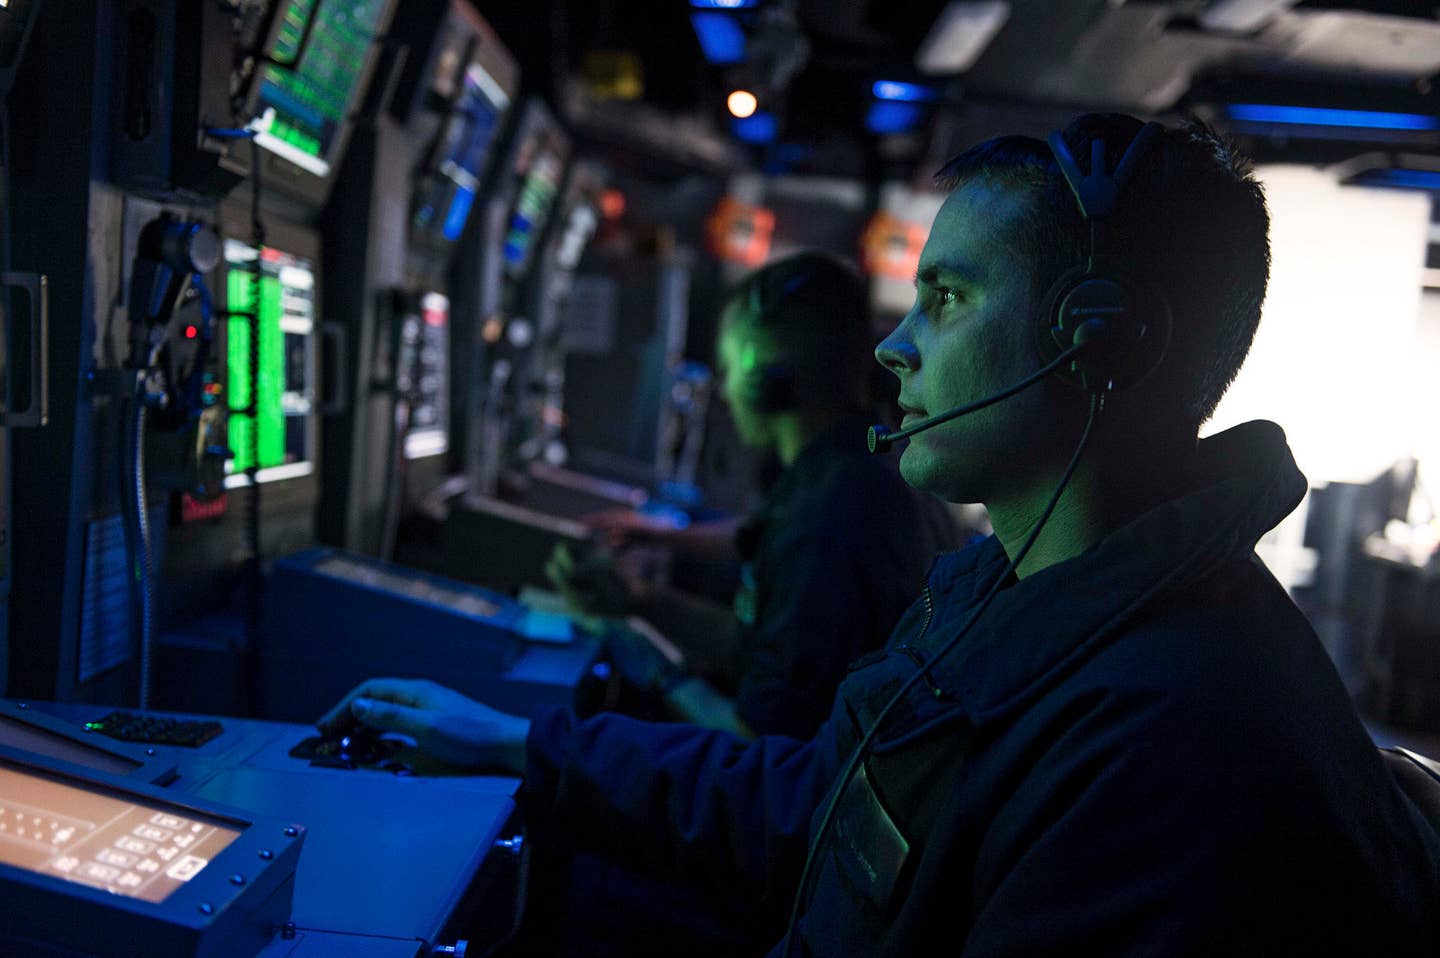 Sonar Technician (Surface) 3rd Class Michael E. Dysthe participates in an anti-submarine exercise while serving onboard the Ticonderoga-class guided-missile cruiser USS Chancellorsville in the Indo-Asia-Pacific region.<br>(U.S. Navy Mass Communication Specialist 2nd Class Andrew Schneider)